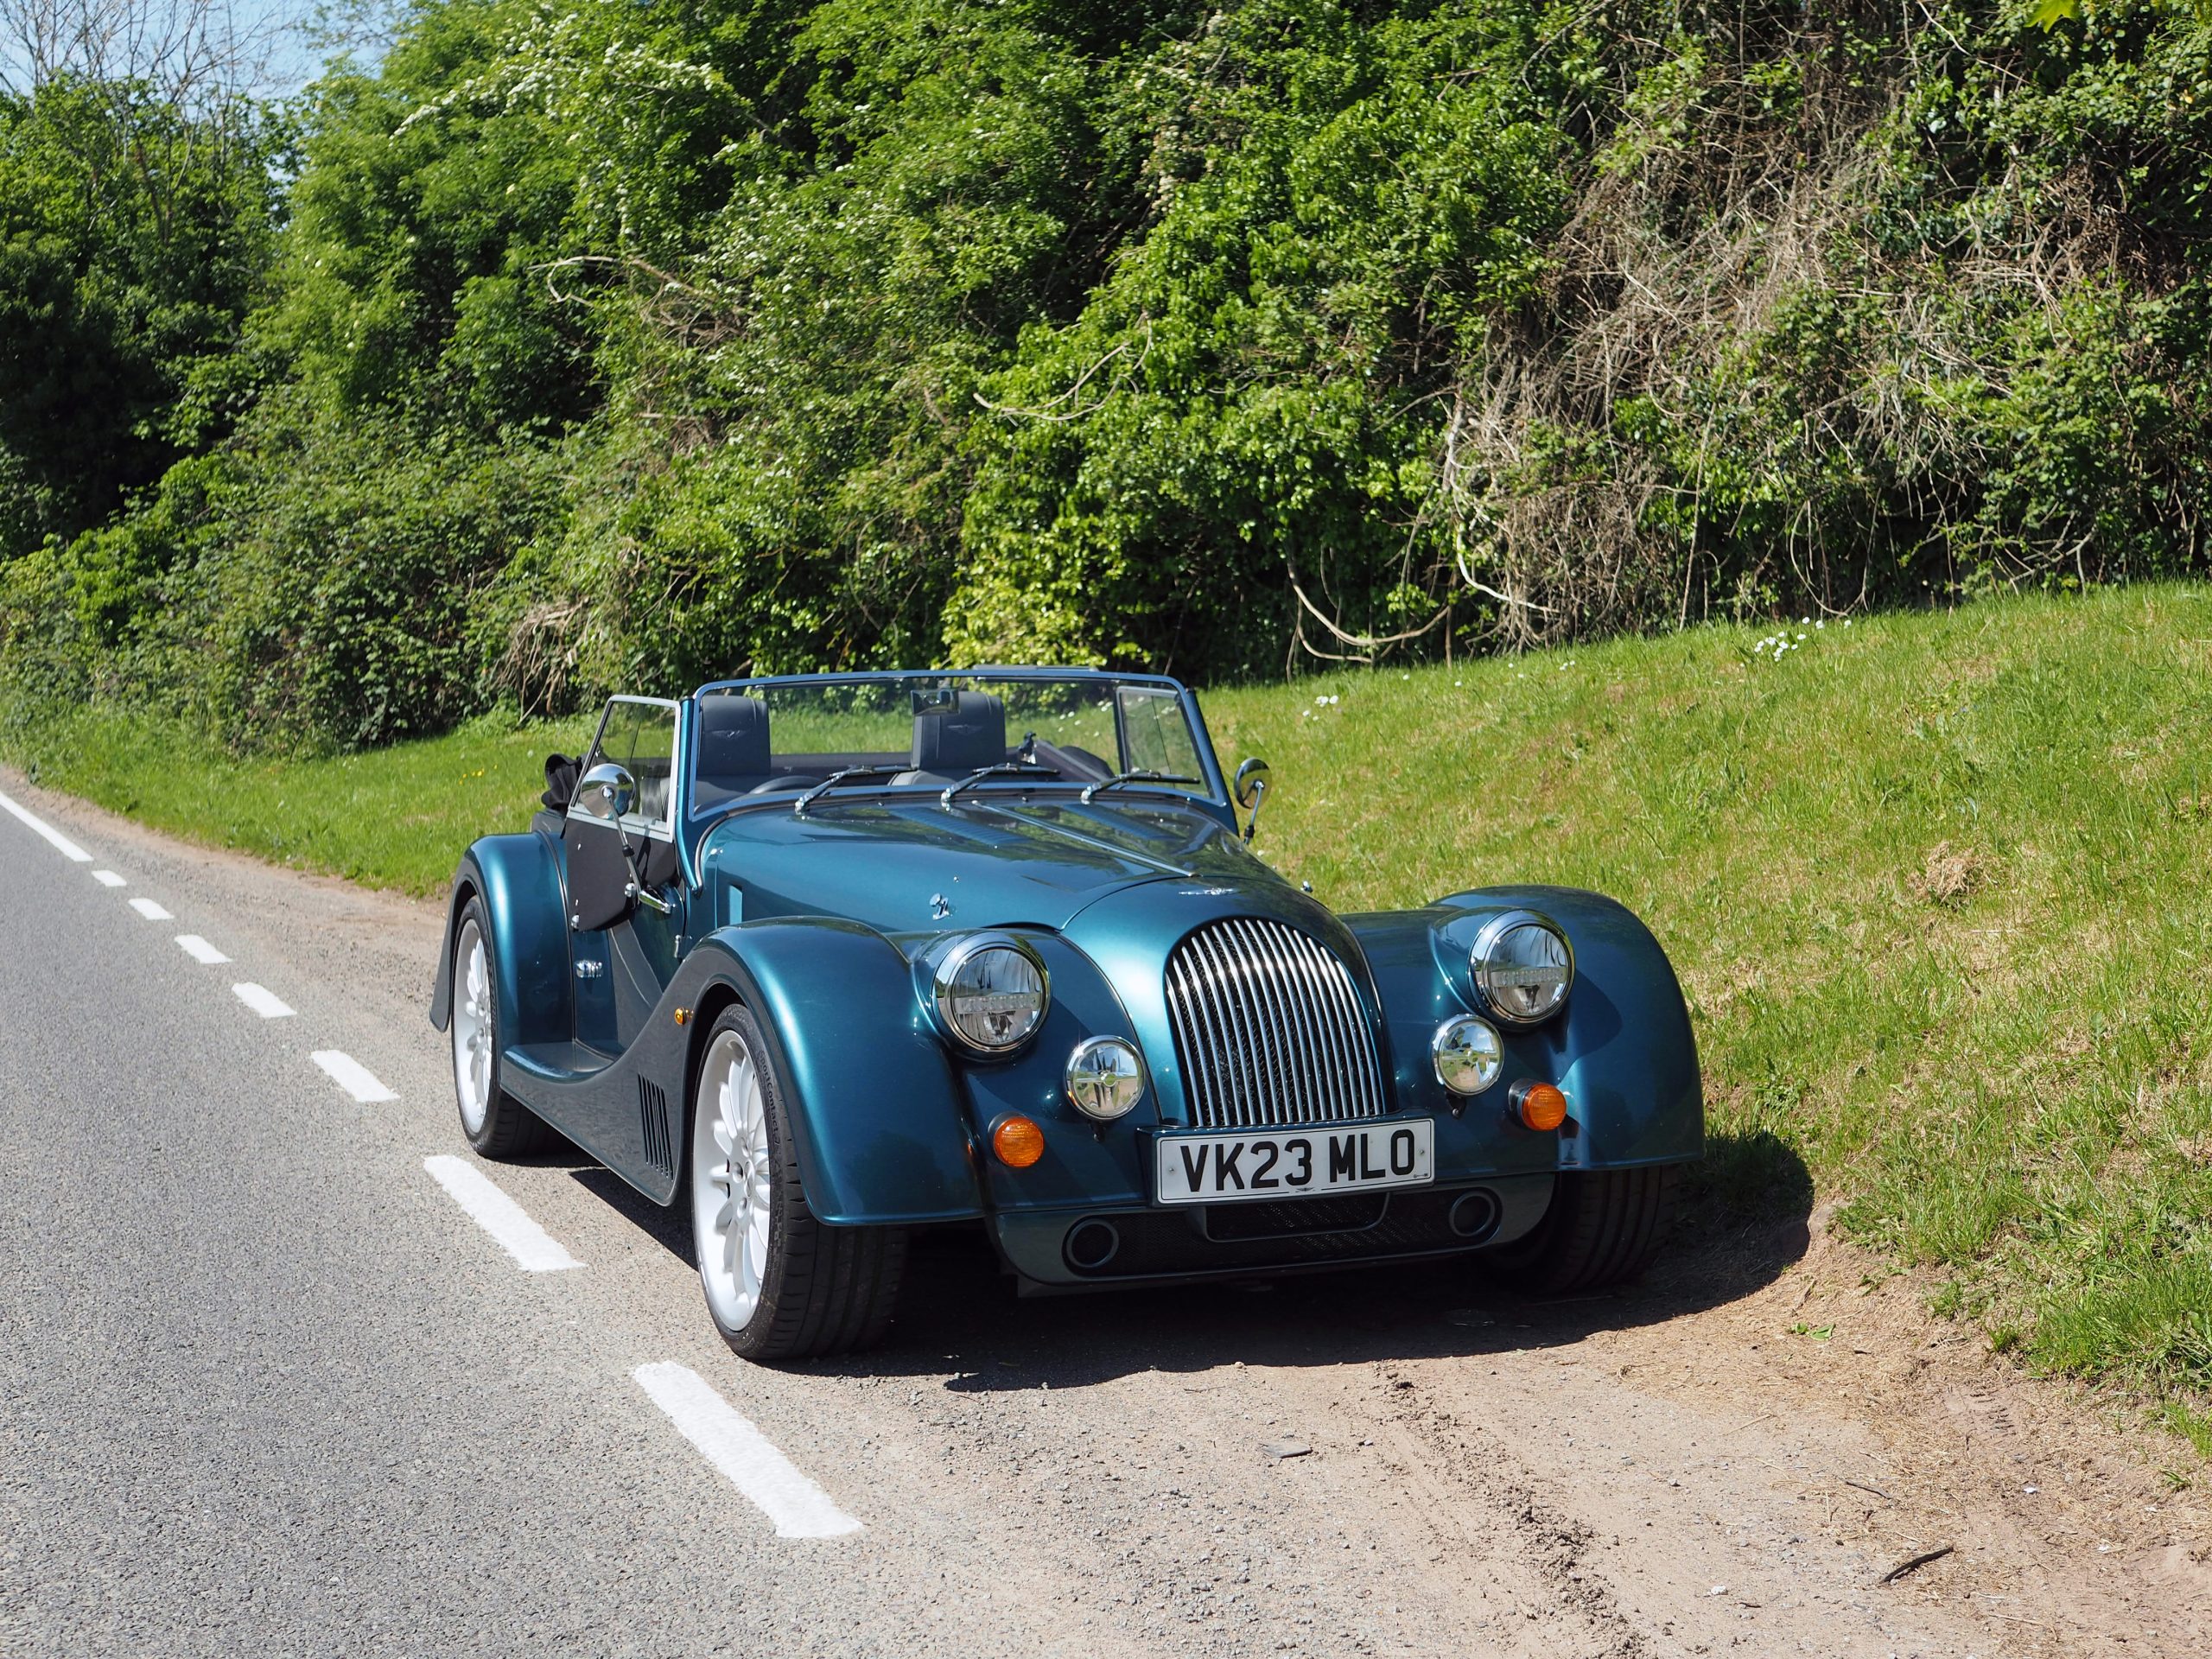 Morgan Plus Six: Timeless Looks, State-of-the-Art Drive